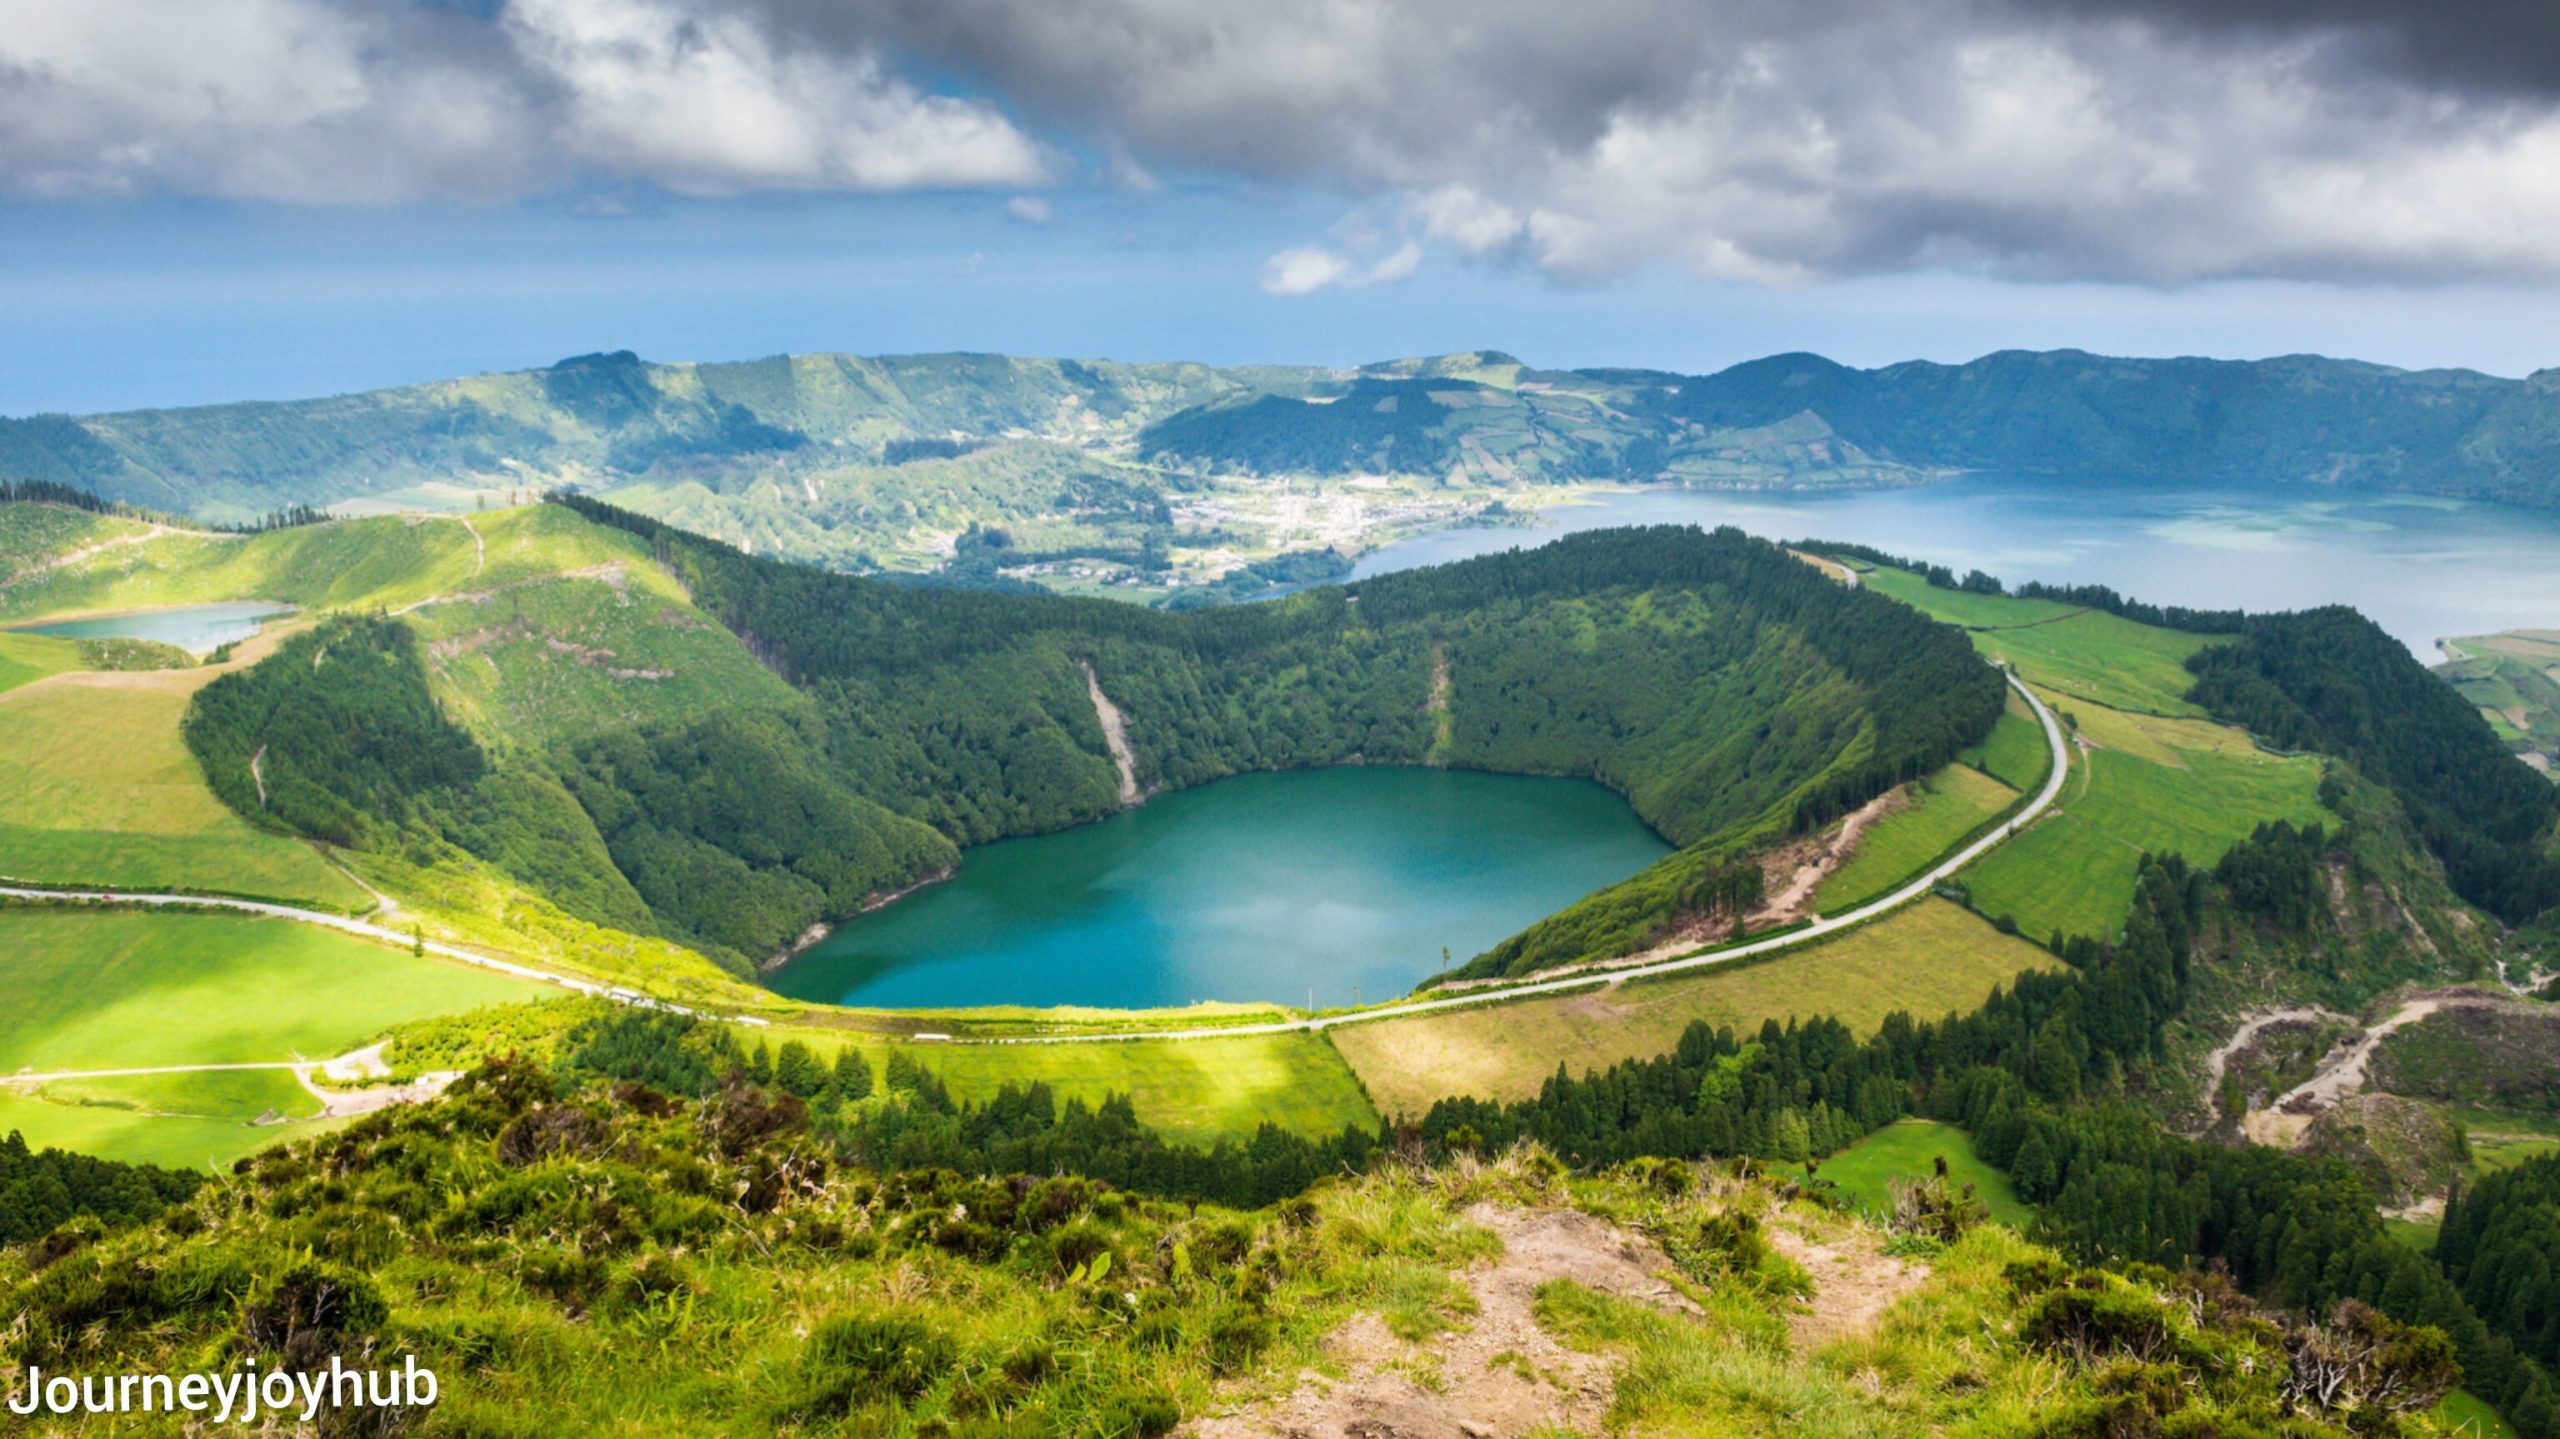 The azores